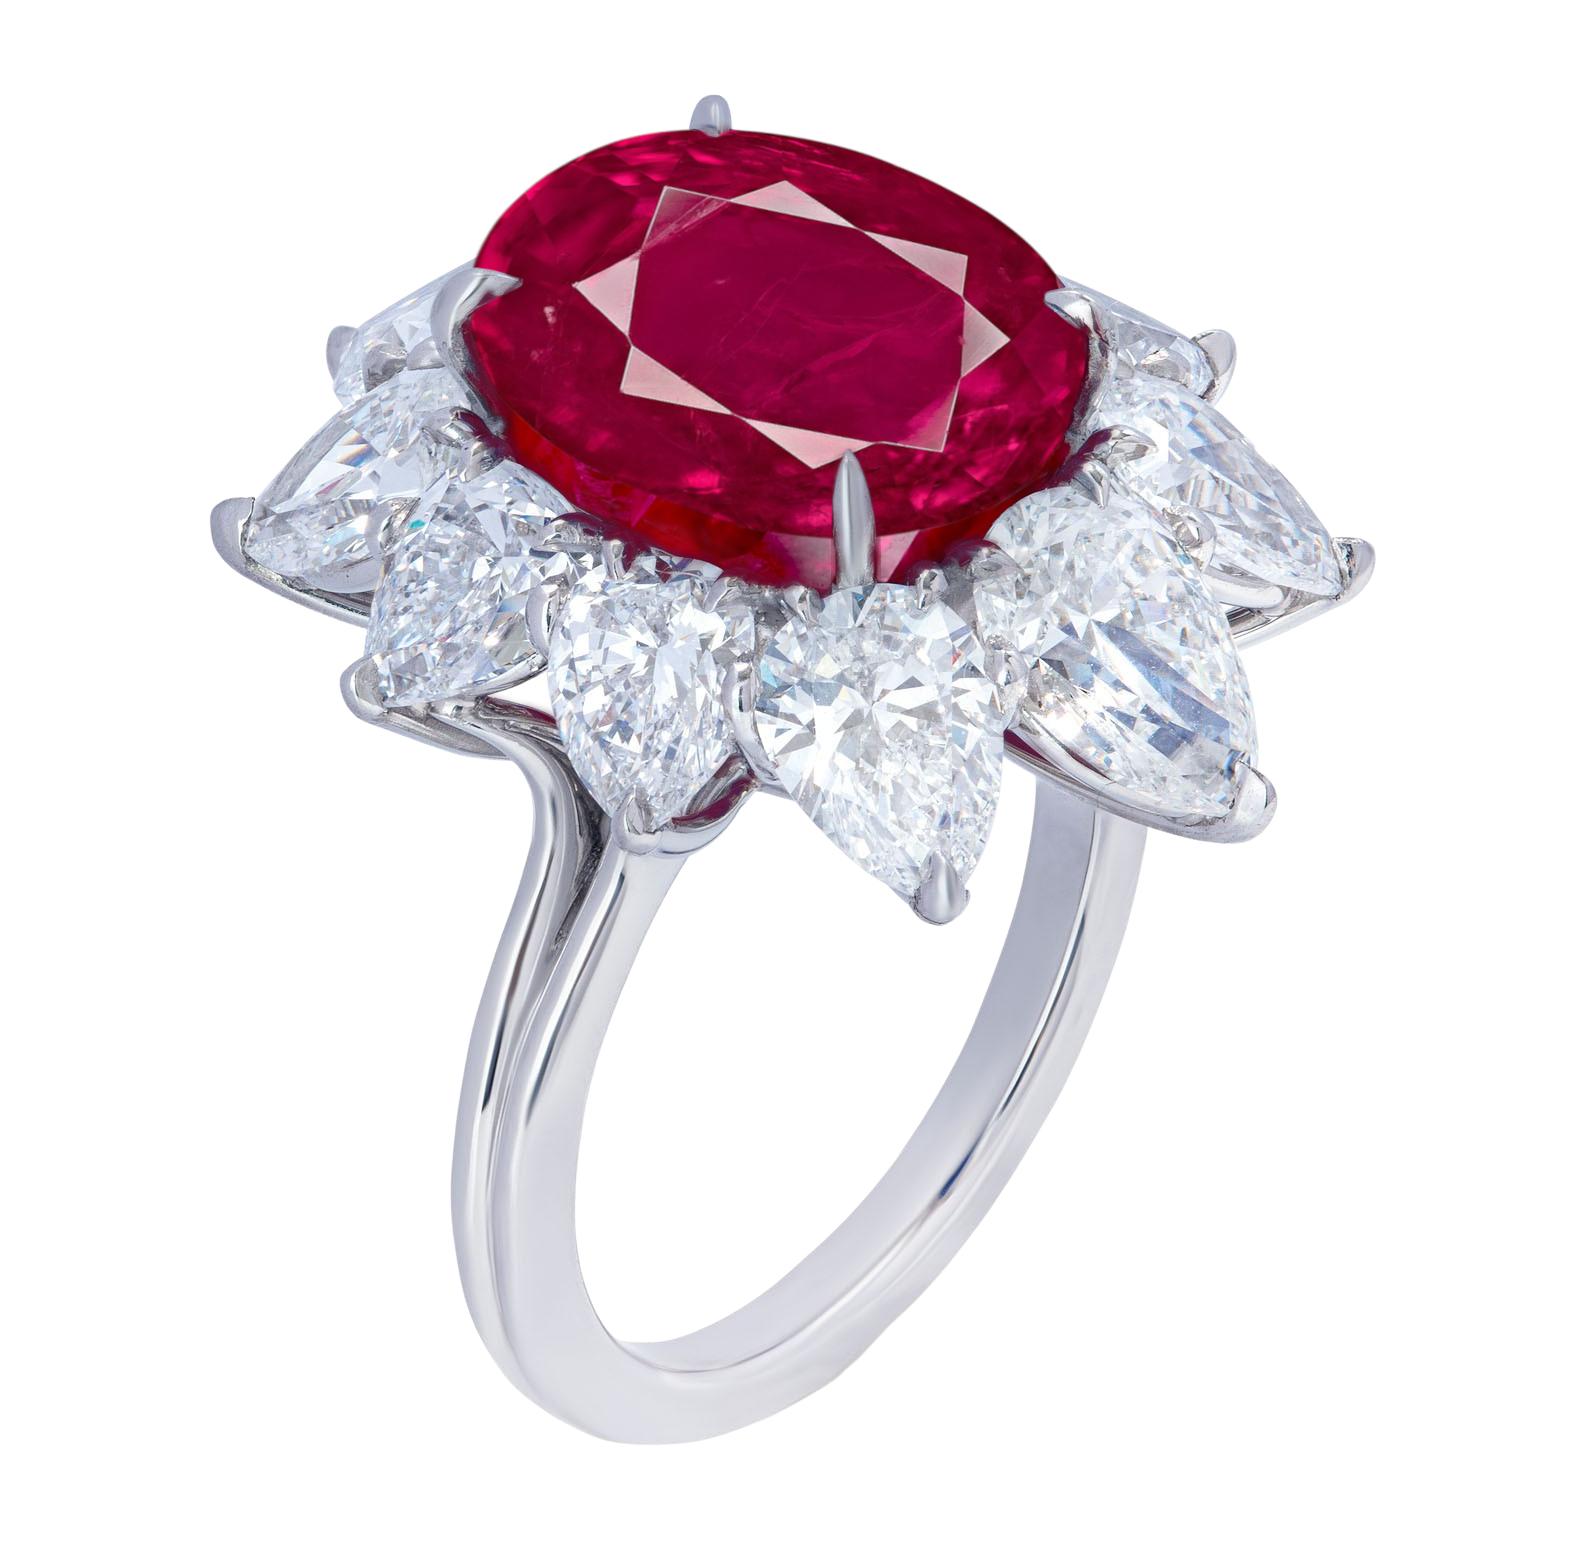 Antinori Fine Jewels is proud to show this exclusive cushion mixed-cut Burma ruby exhibits its ideal red hue in this ring. For centuries, rubies from Myanmar, Burma has ranked among the most sought-after gemstones in the world, as stones that hail